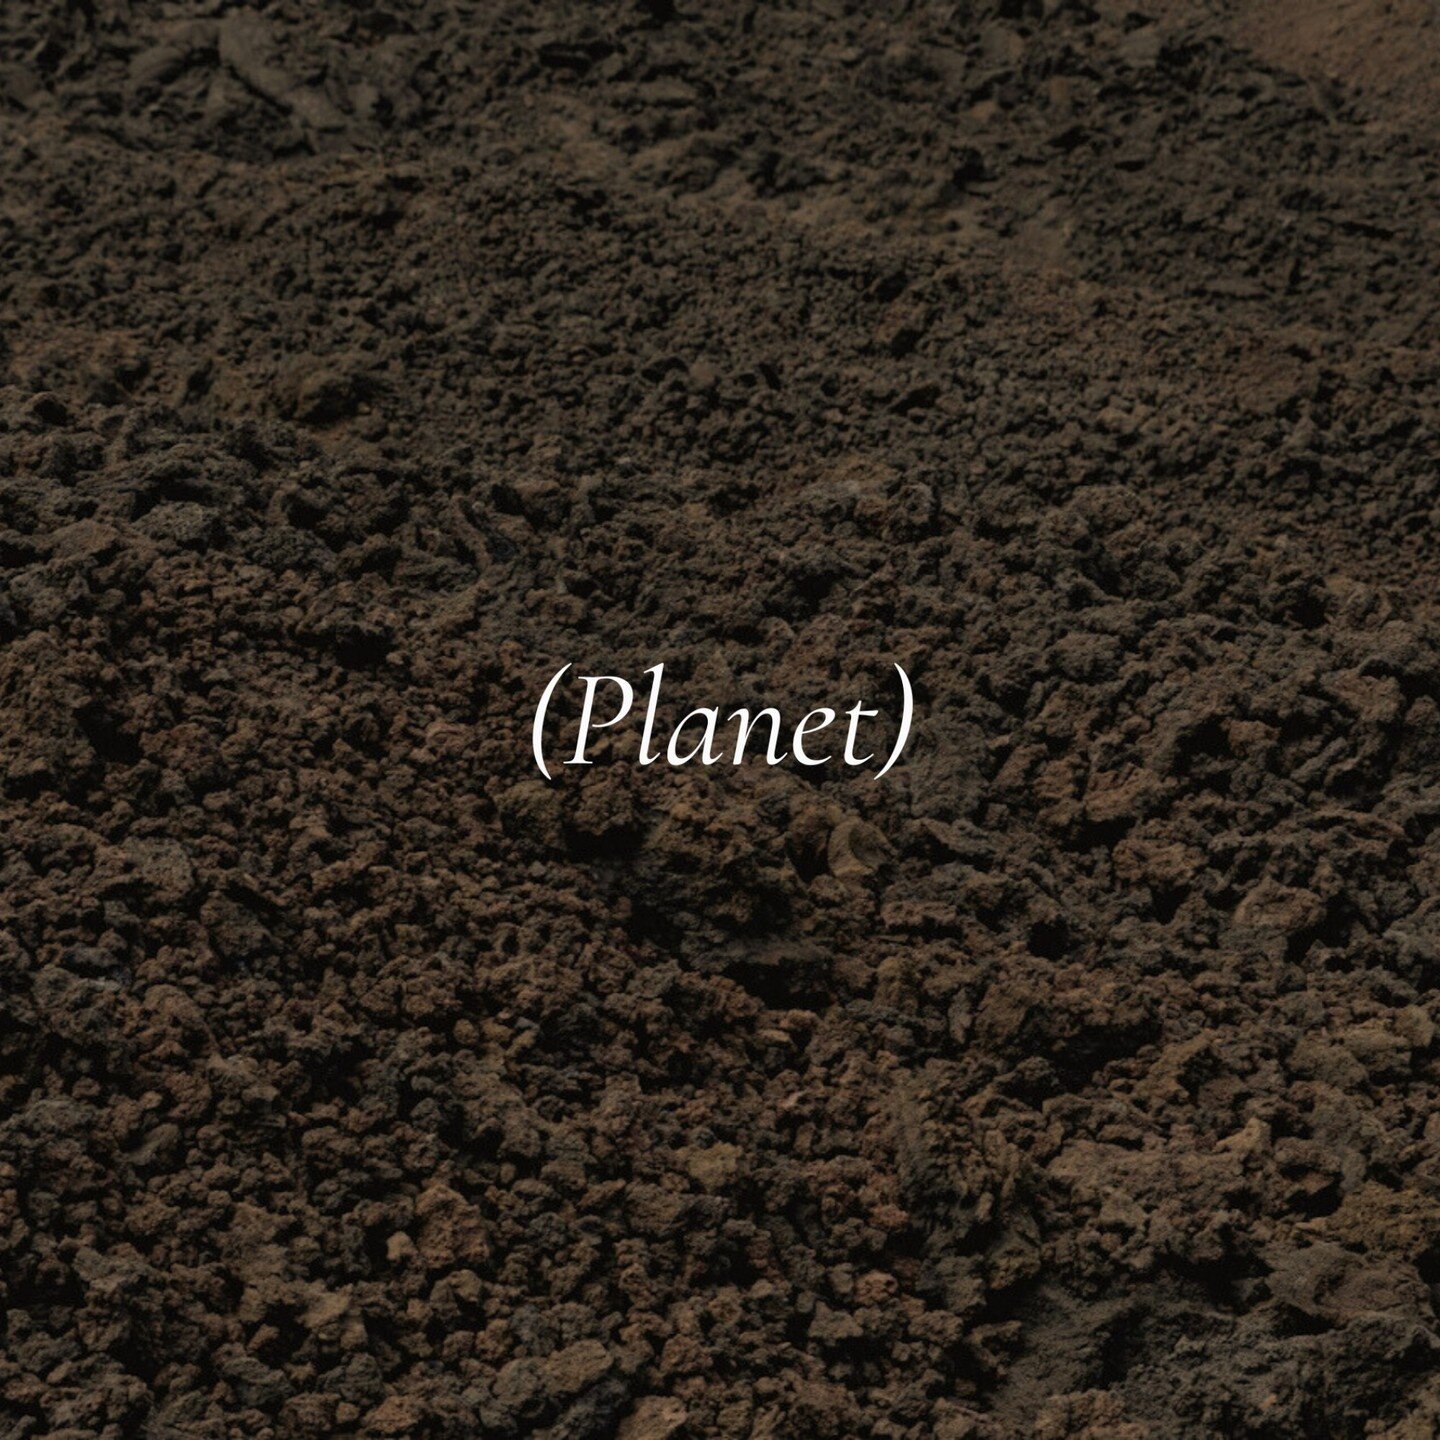 PILLAR || PLANET
We recognize that our planet faces unprecedented challenges, and we are dedicated to supporting its regeneration. We firmly believe that humanity and nature are deeply interconnected, and our well-being is intricately linked to the h